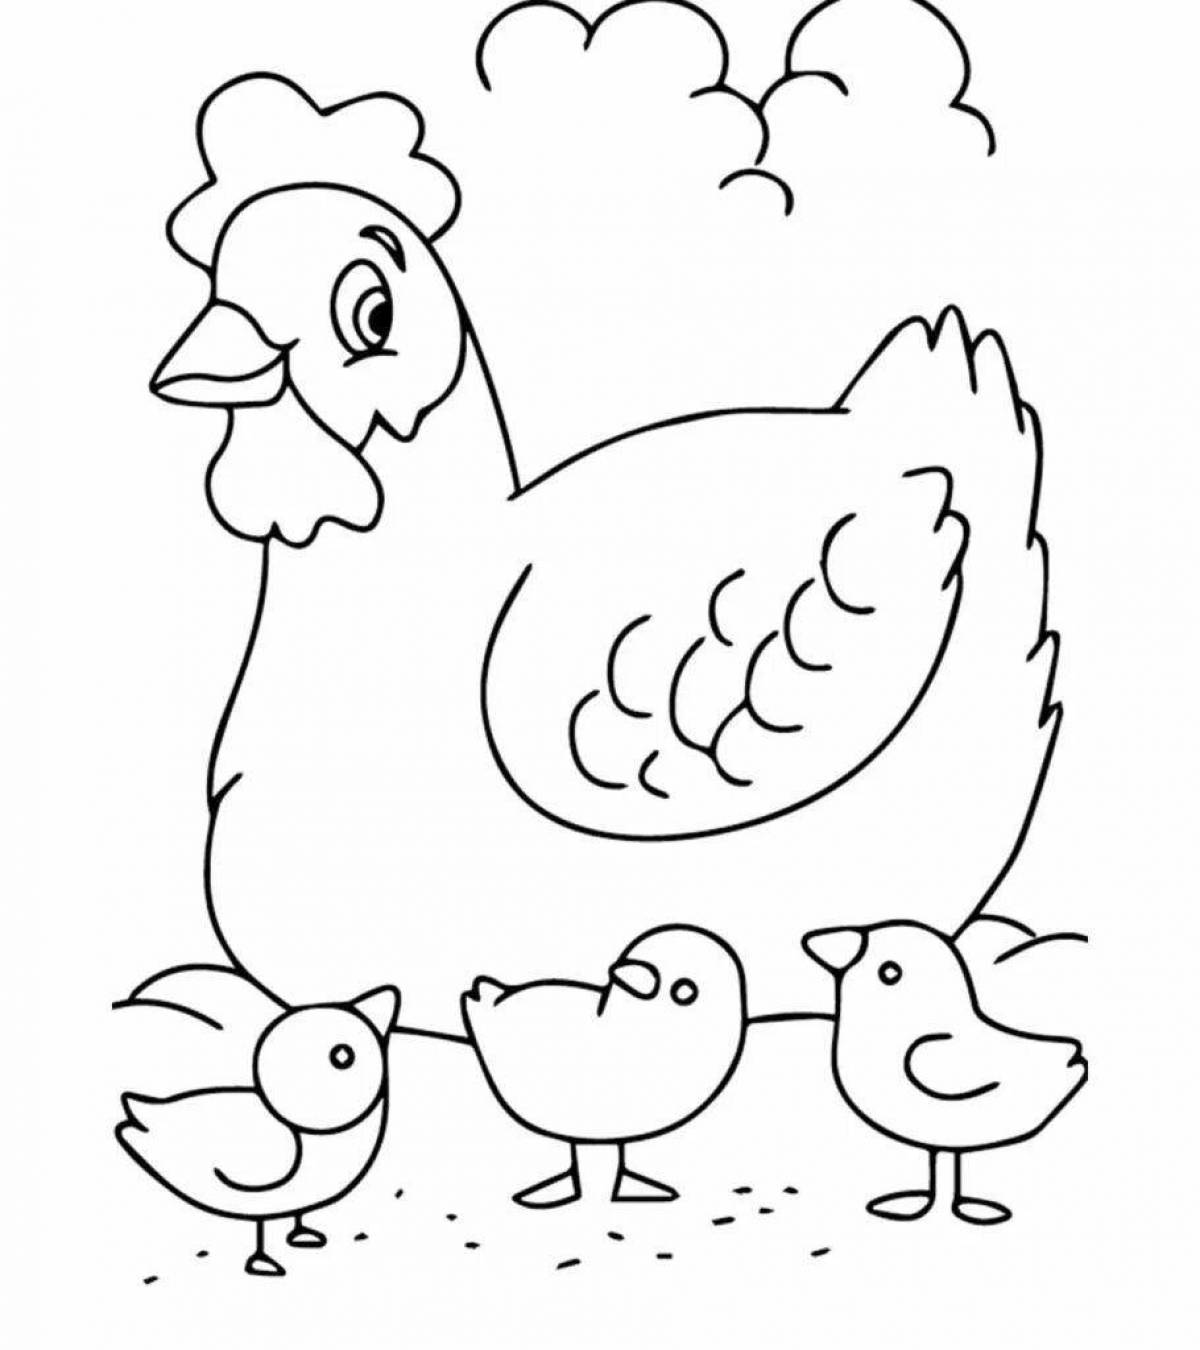 Chicken bright coloring for kids